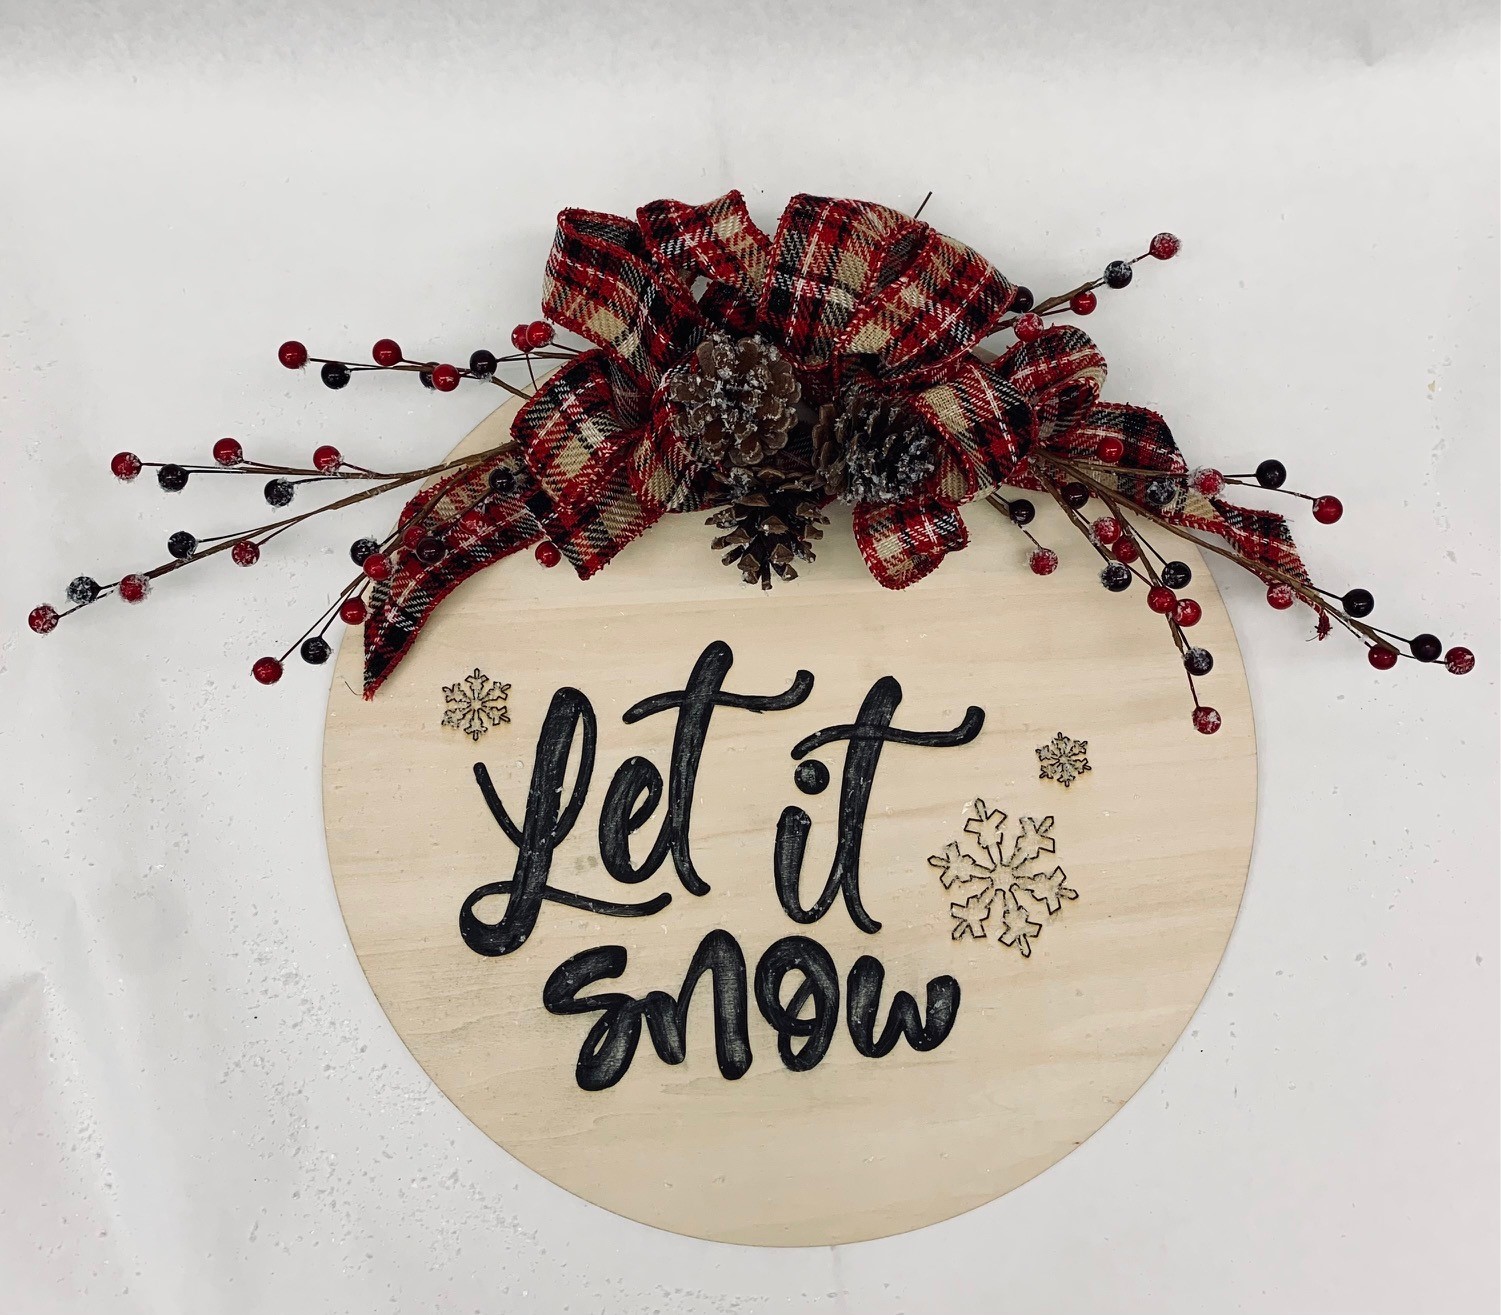 "Let it snow" text on wood circle with ribbon and berries